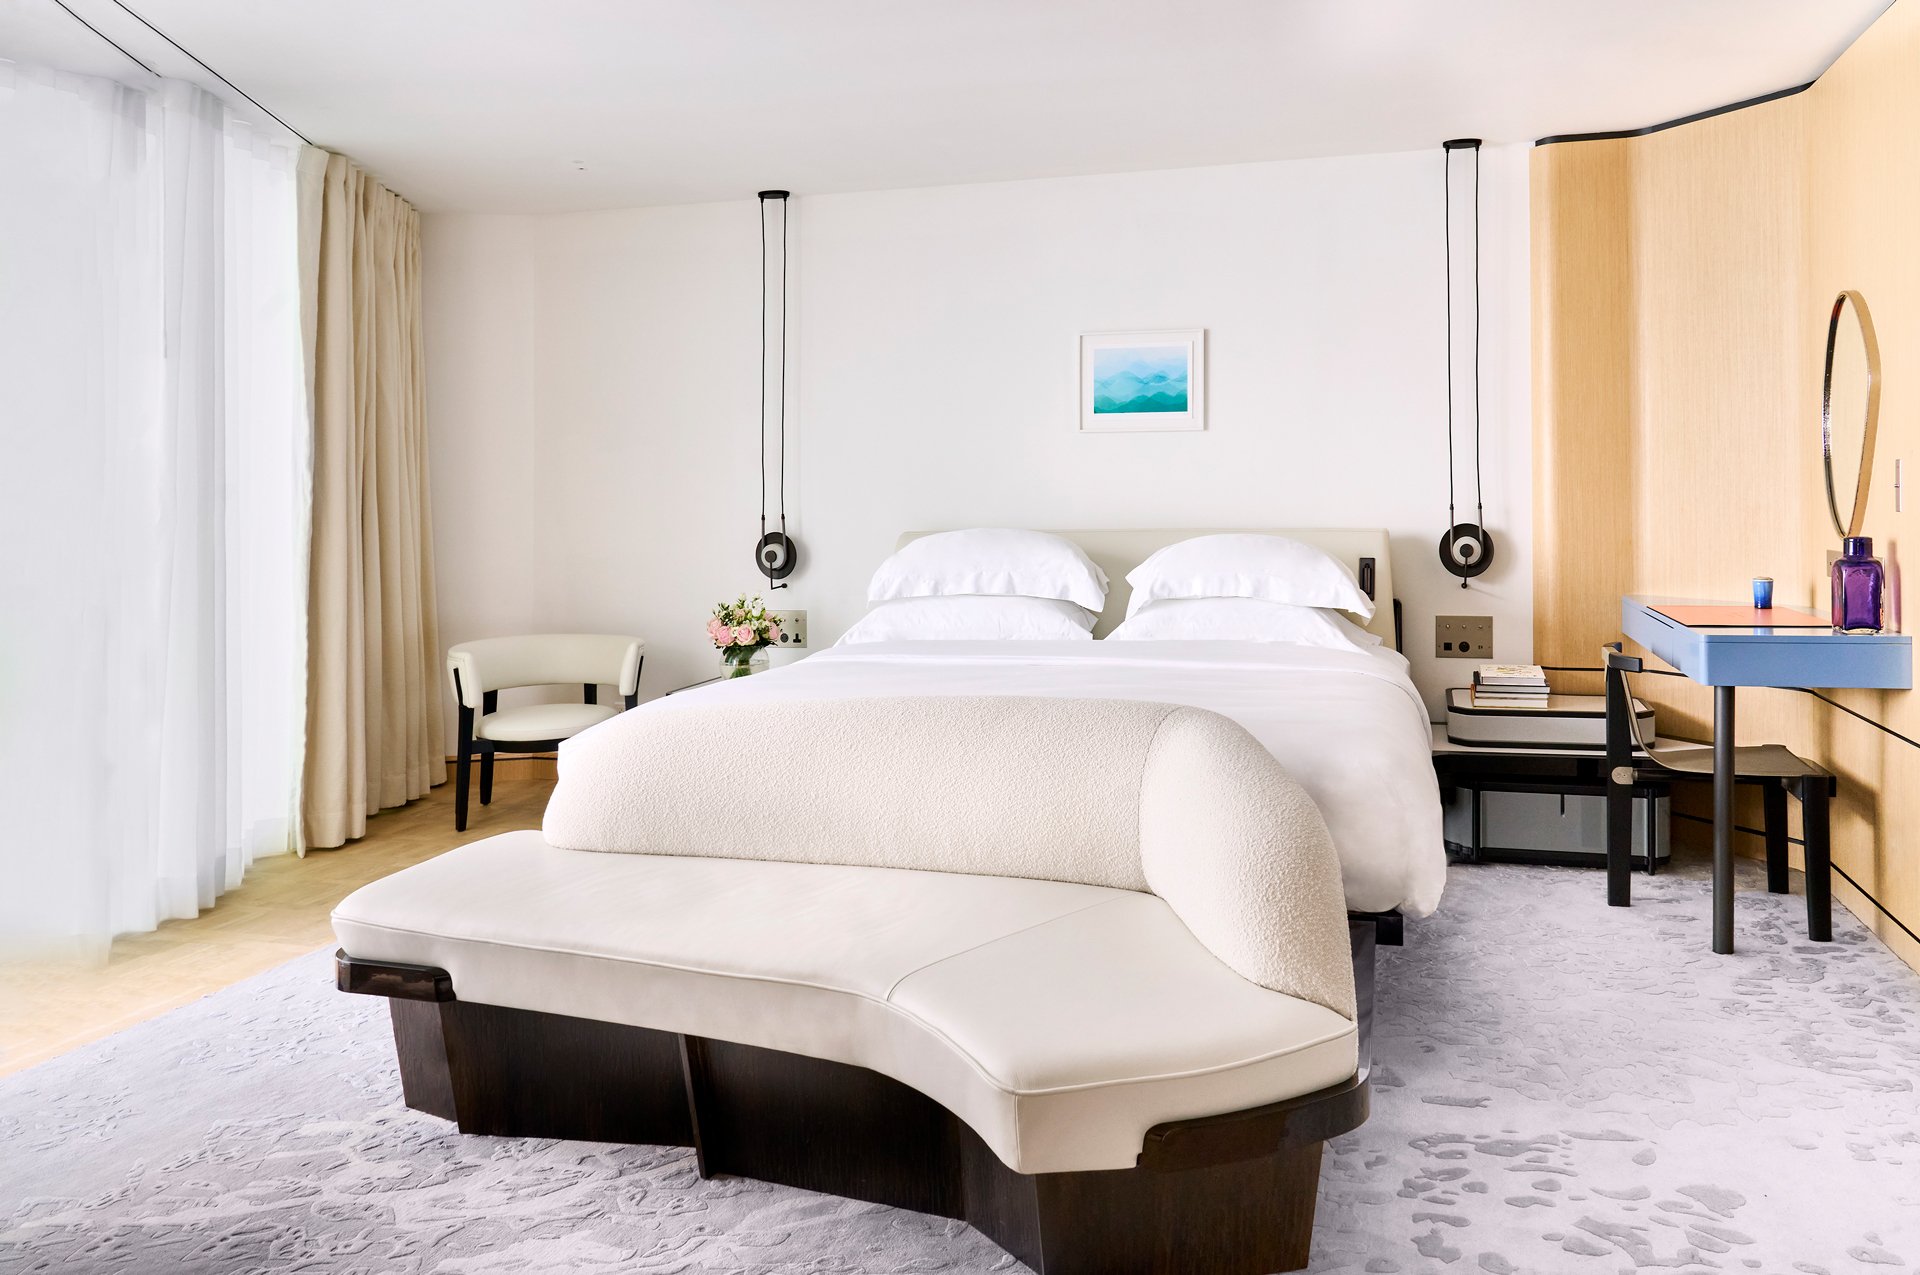 A spacious queen bed
on a grey carpet in the Panoramic Room.